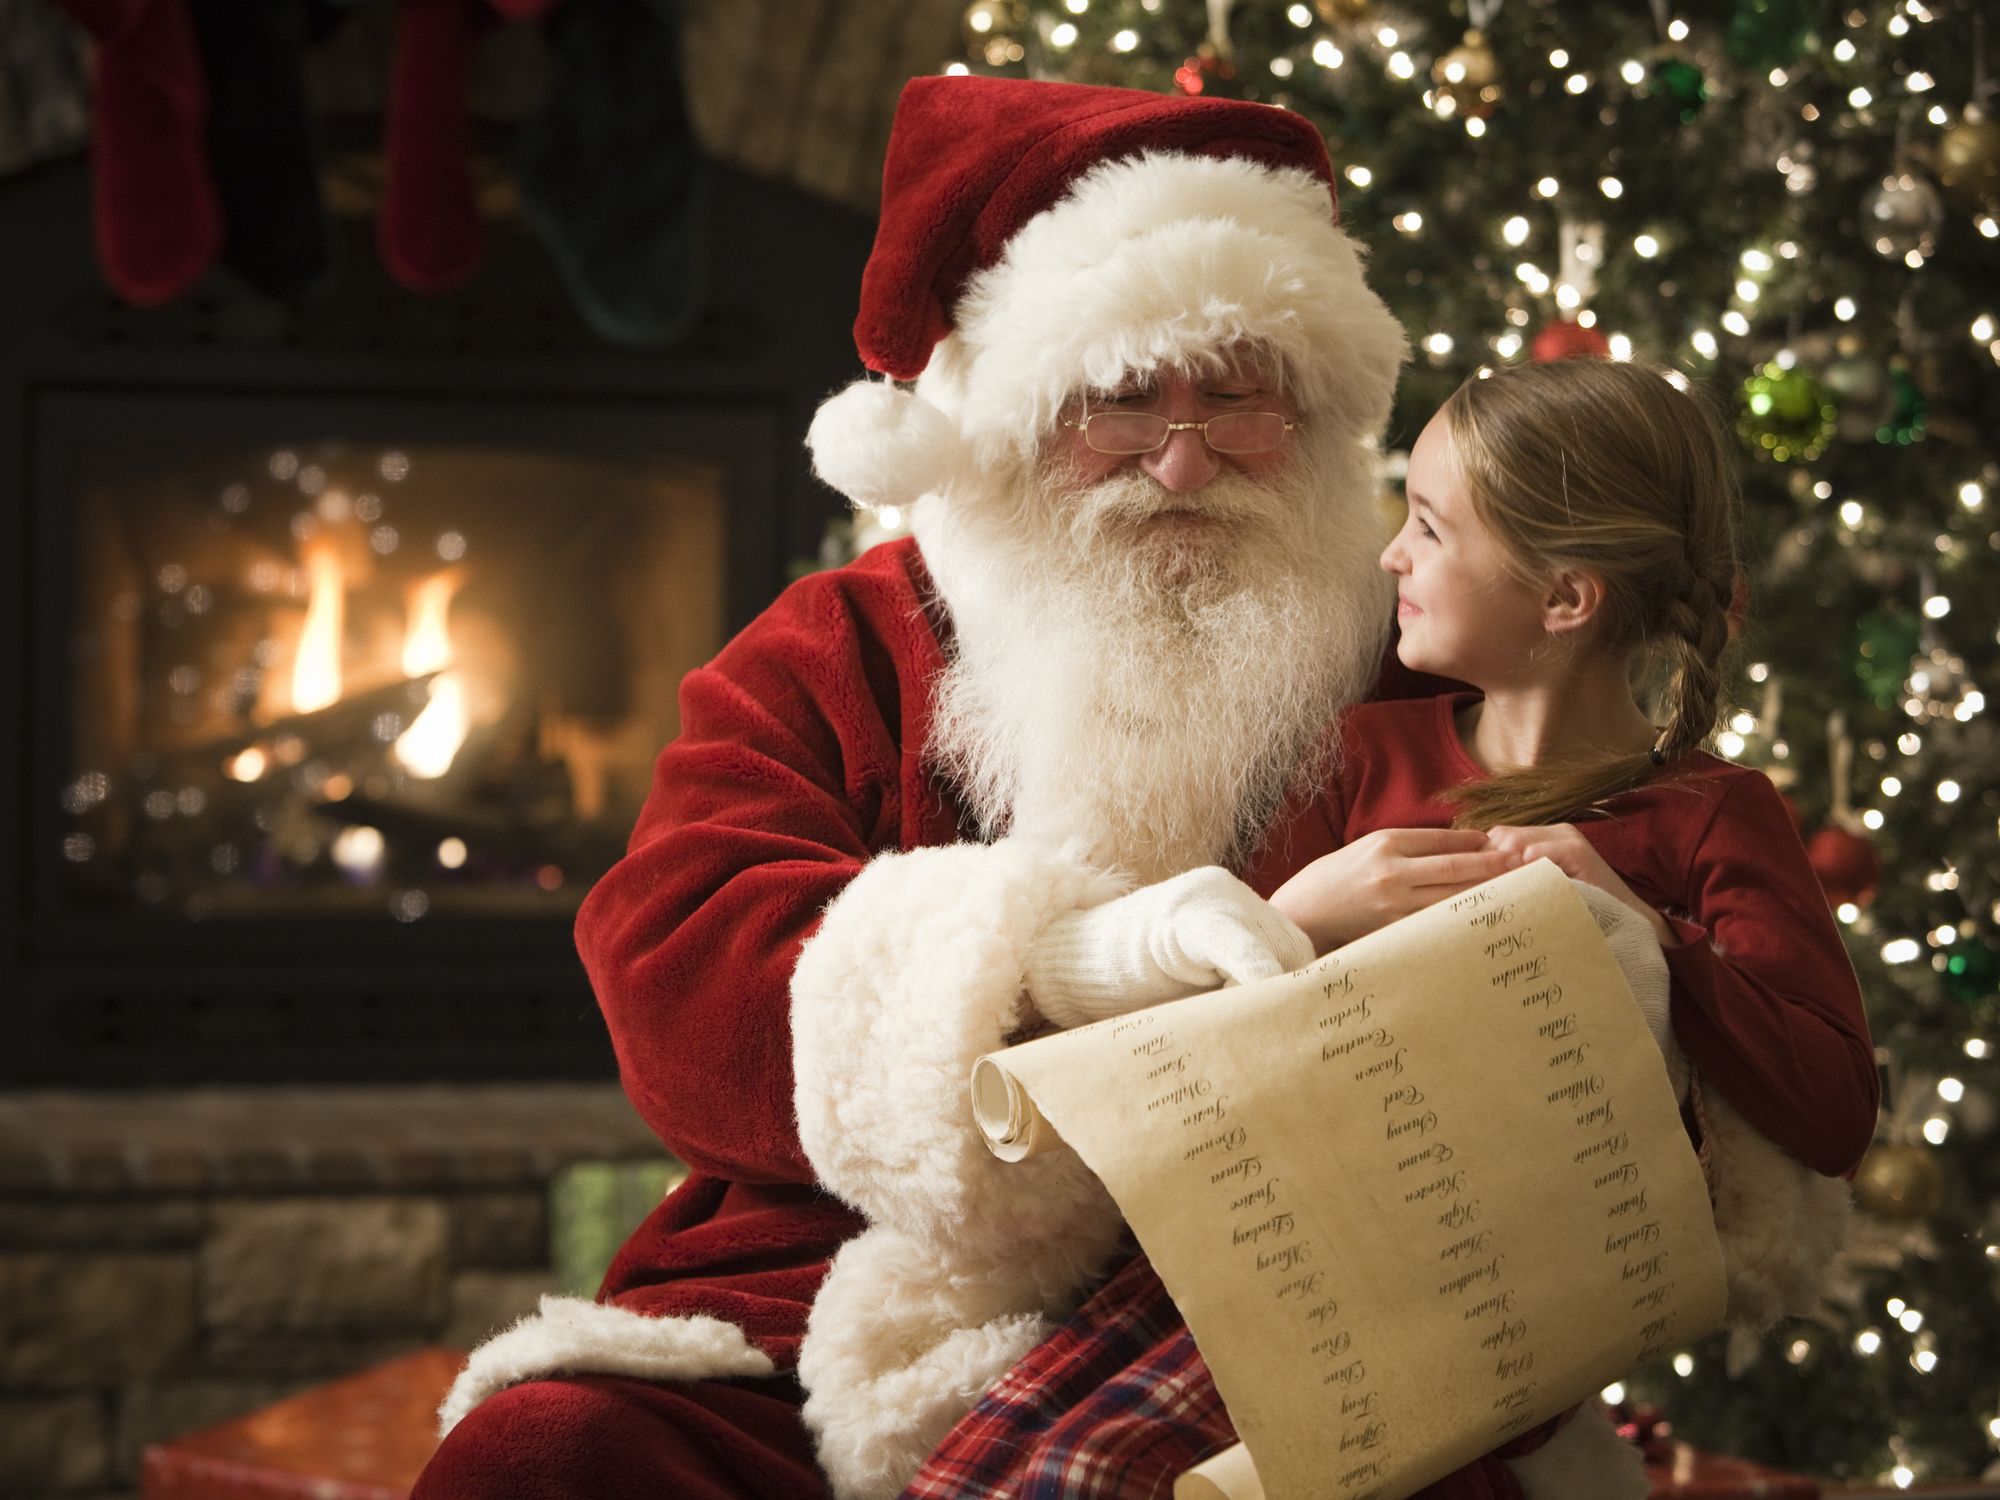 Is Santa real for little kids?